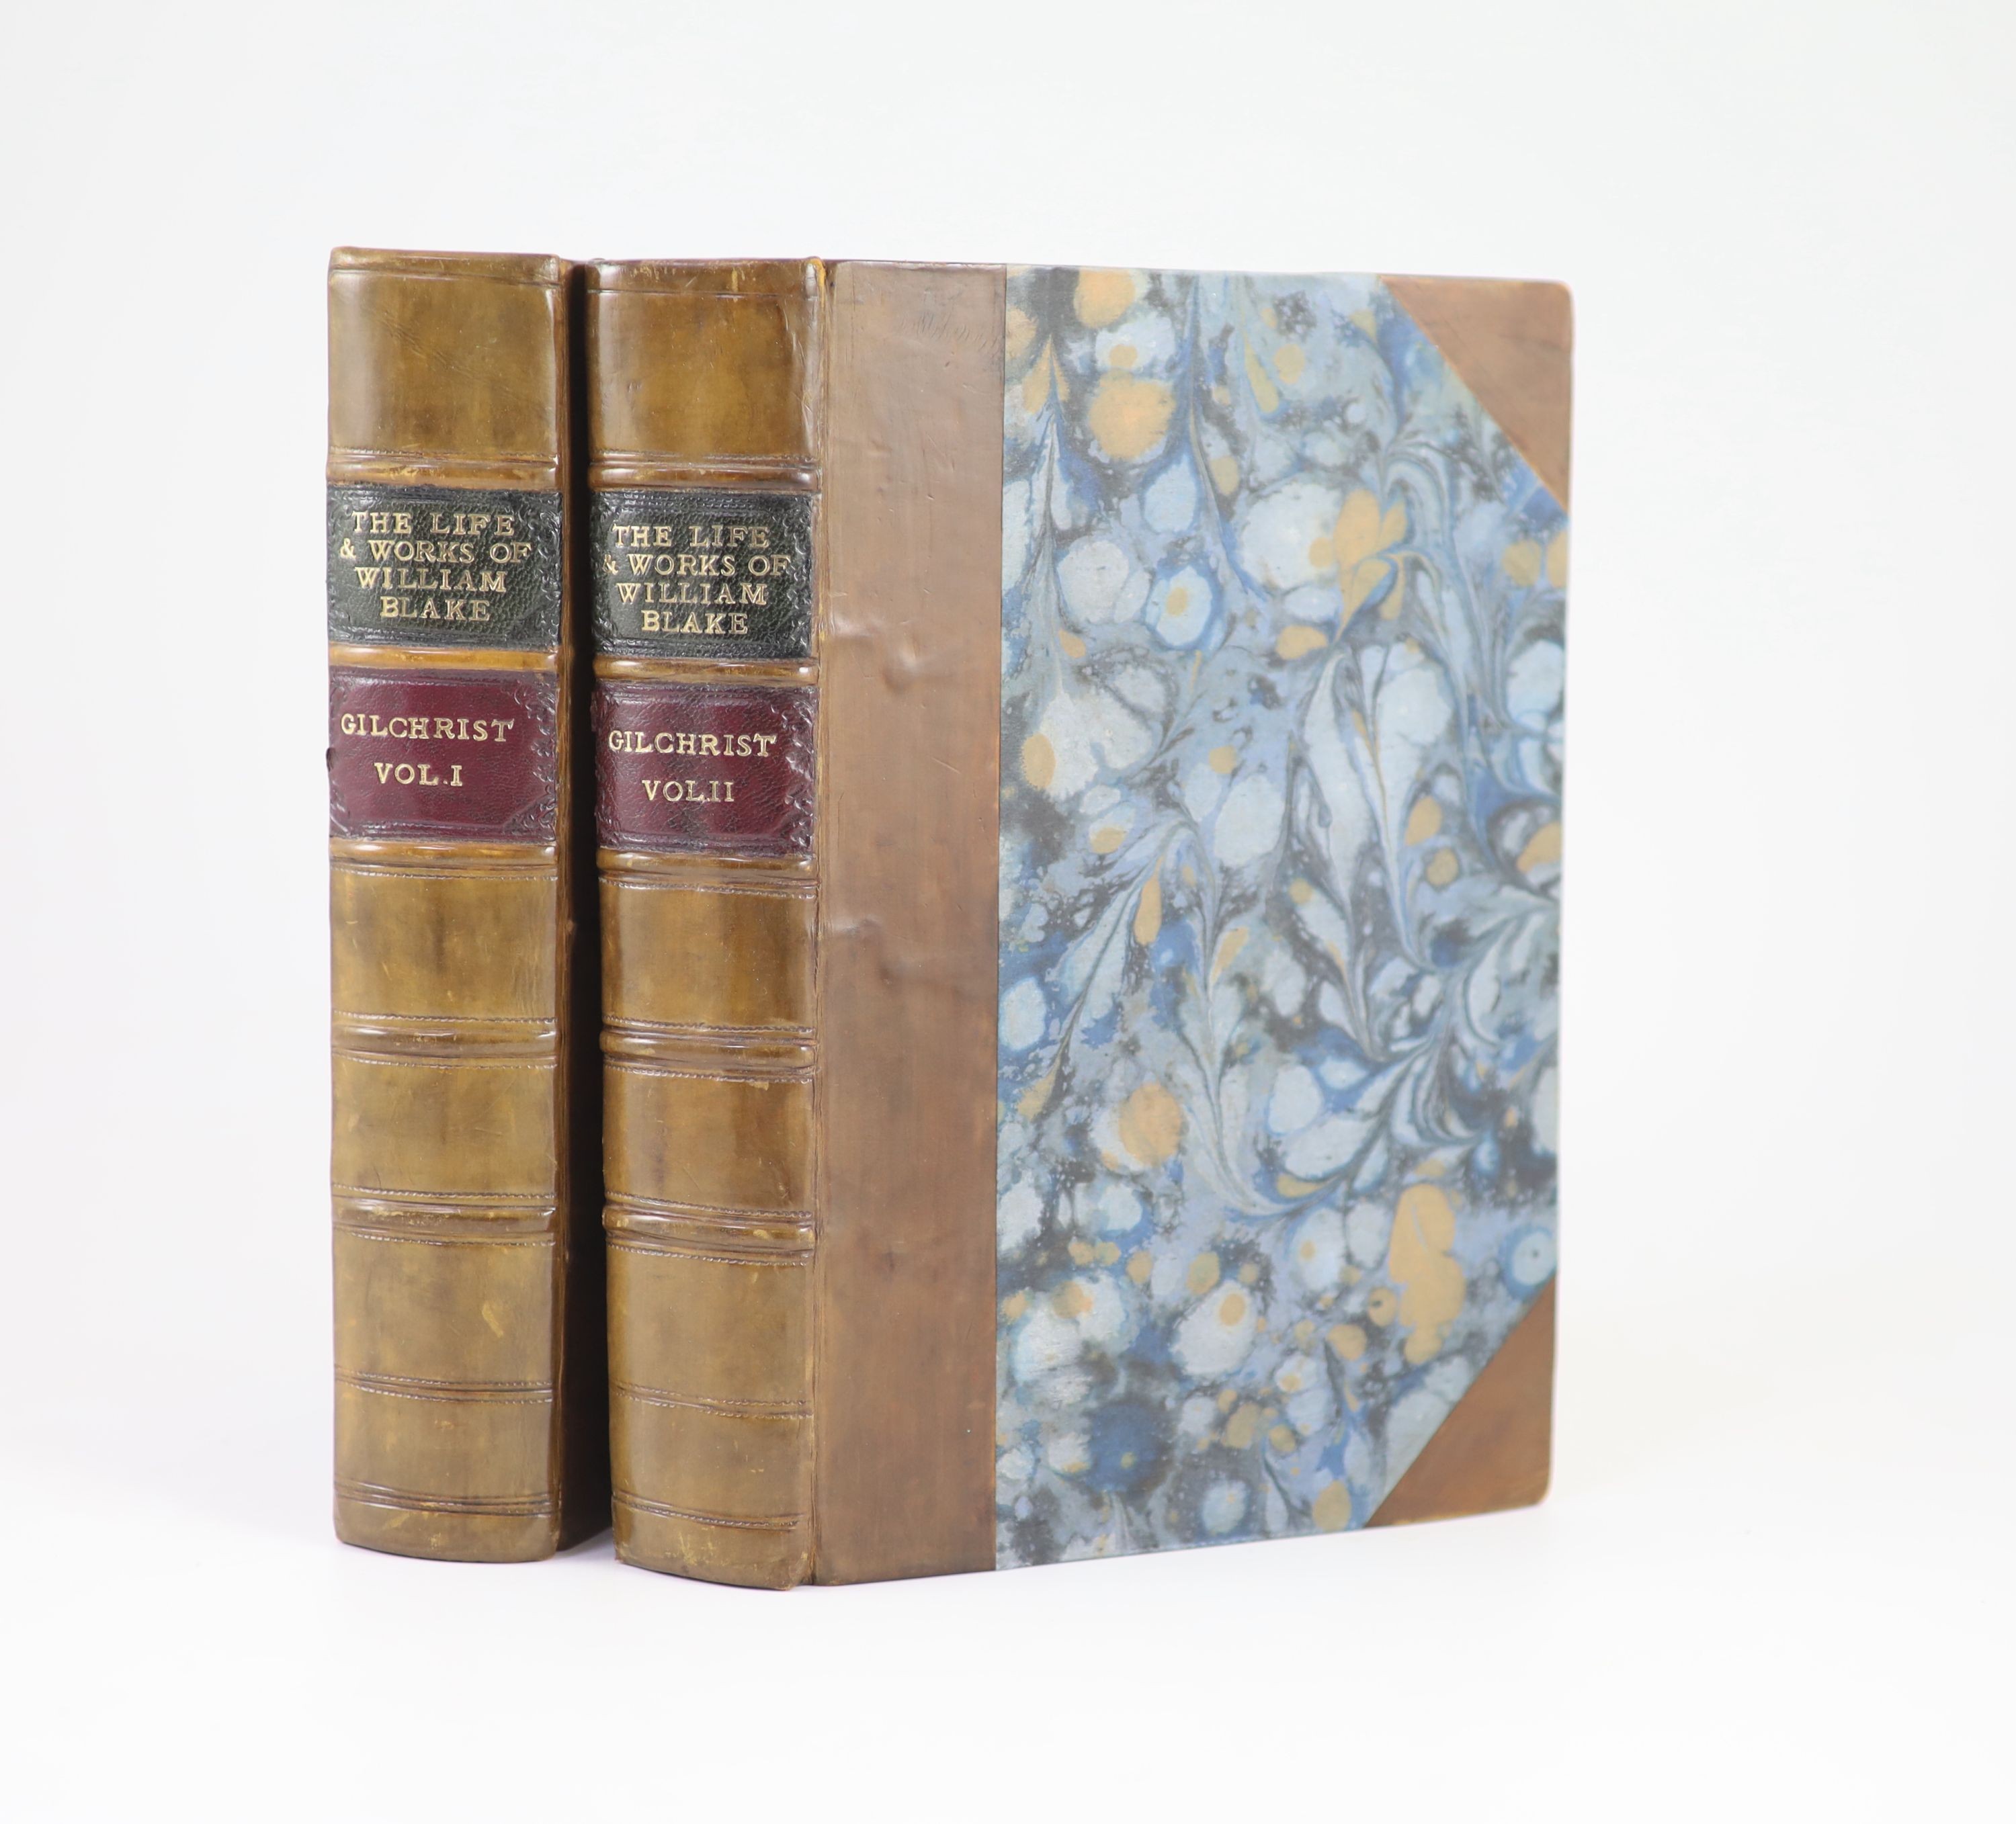 Gilchrist, Alexander- Life of William Blake, 2 vols, 2nd edition, rebound half calf with marbled boards, Macmillan, London, 1880